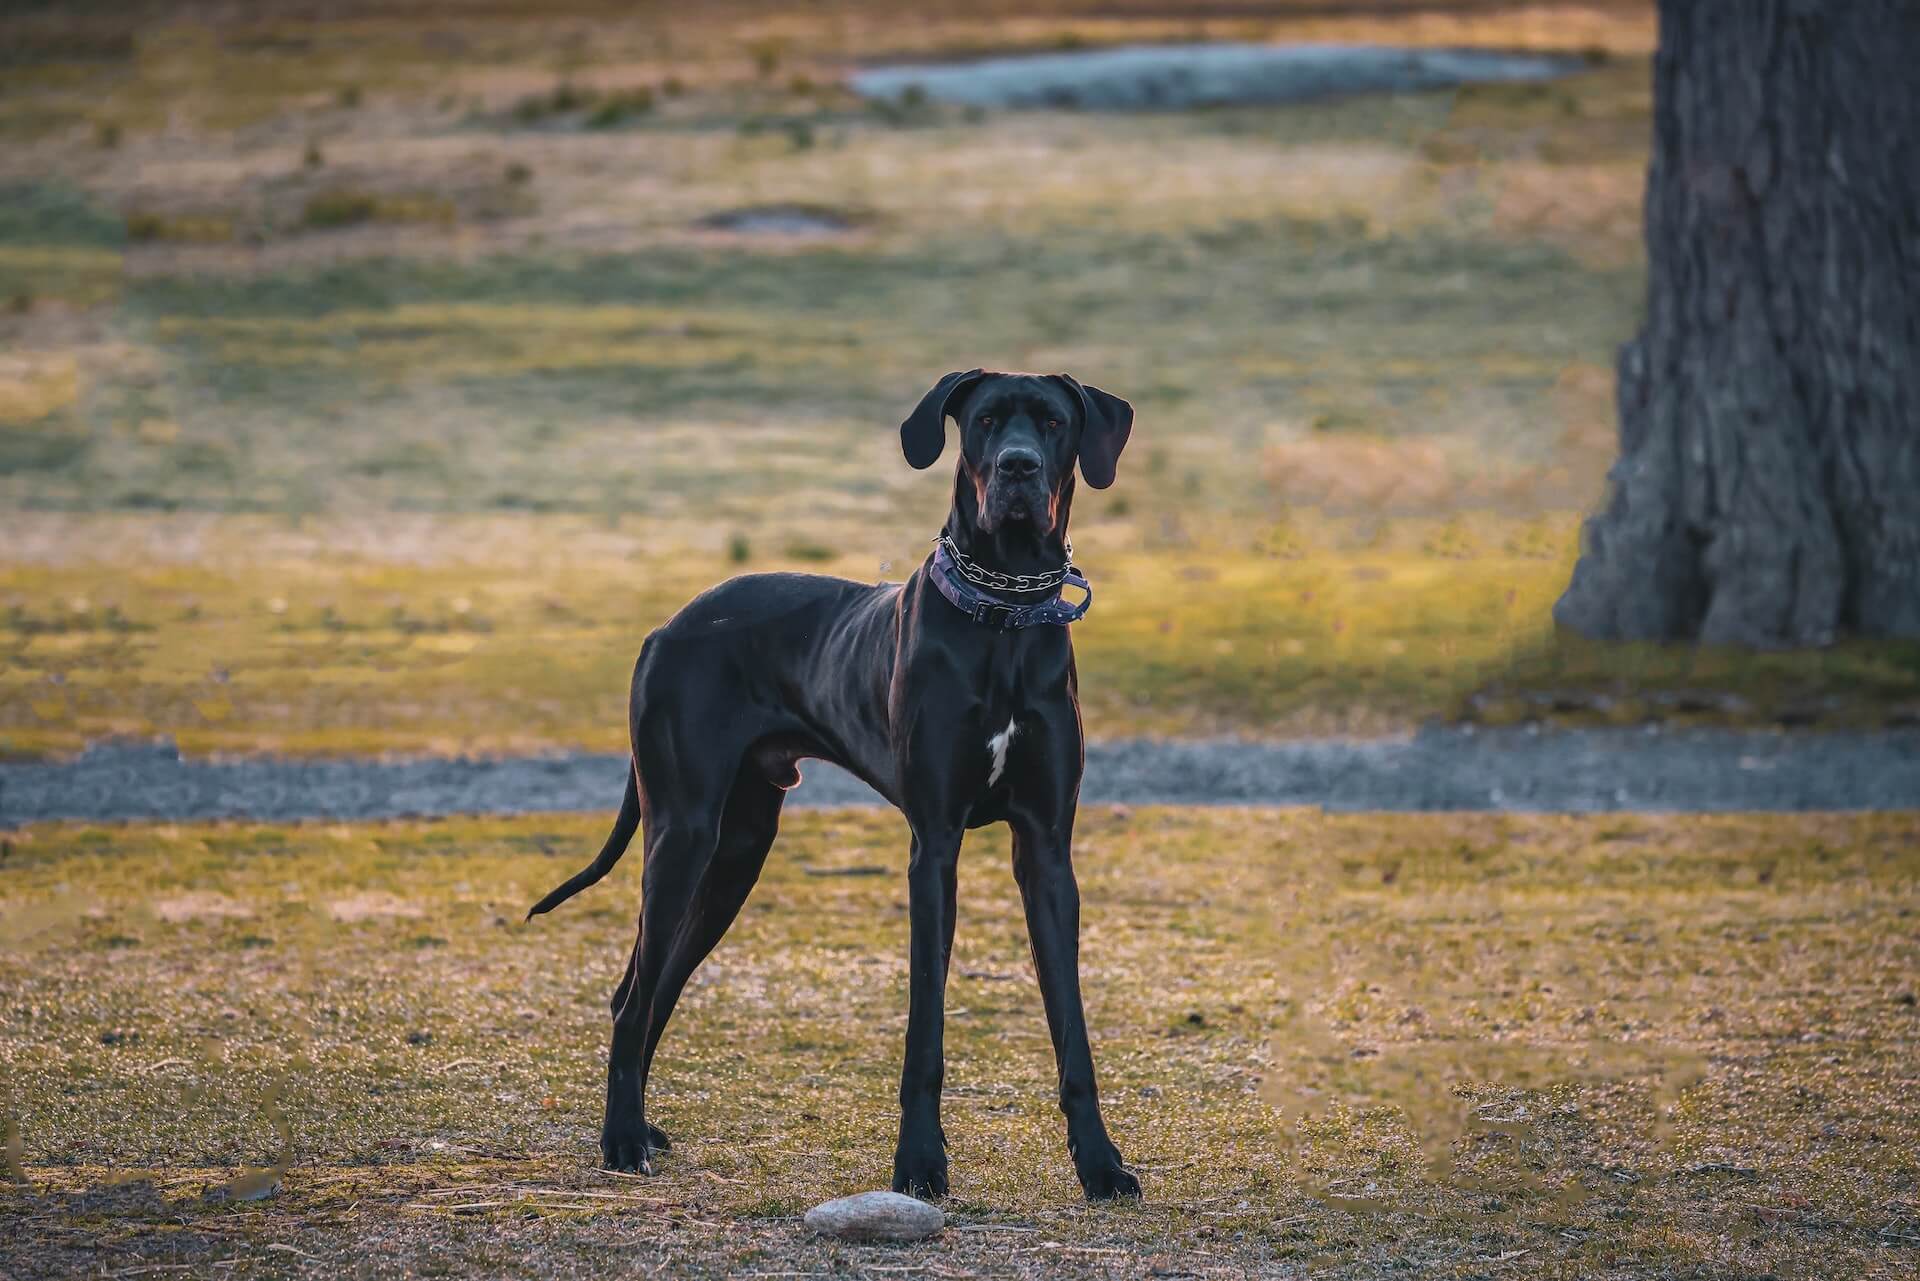 Great Dane, picture captured by David Kanigan